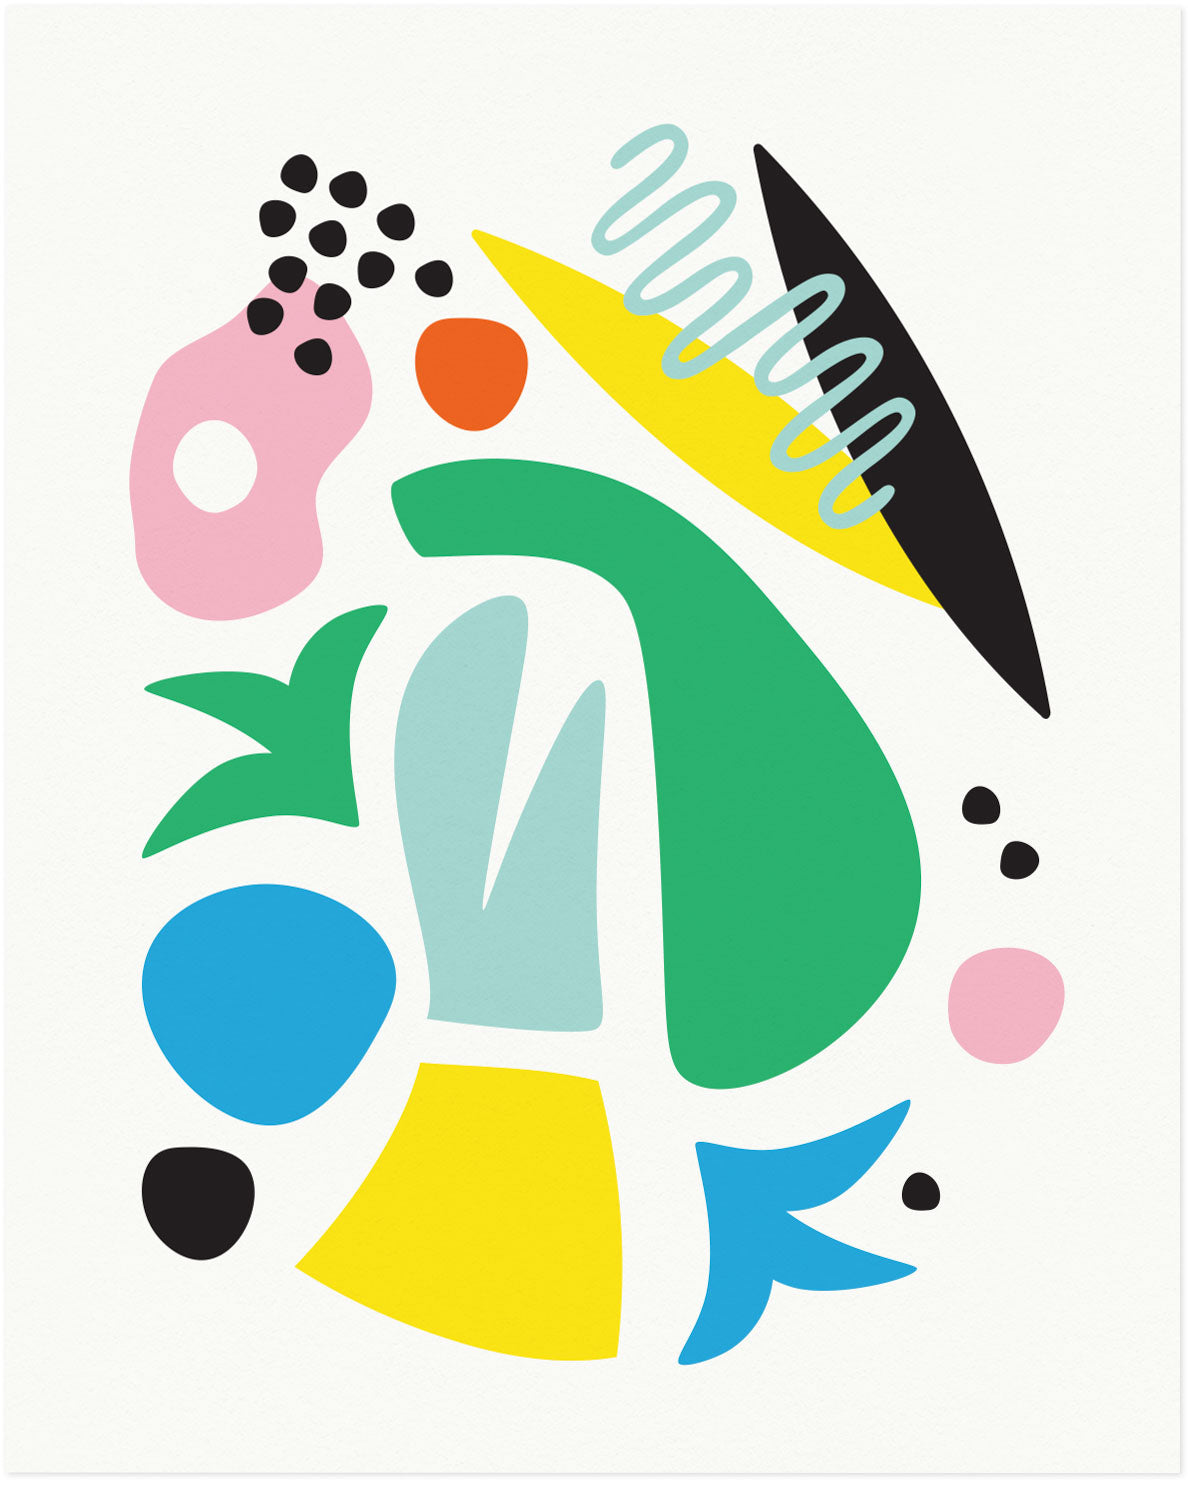 "Pool Party" Miro inspired abstract shapes composition archival giclée art print. Made in USA by My Darlin' @mydarlin_bk